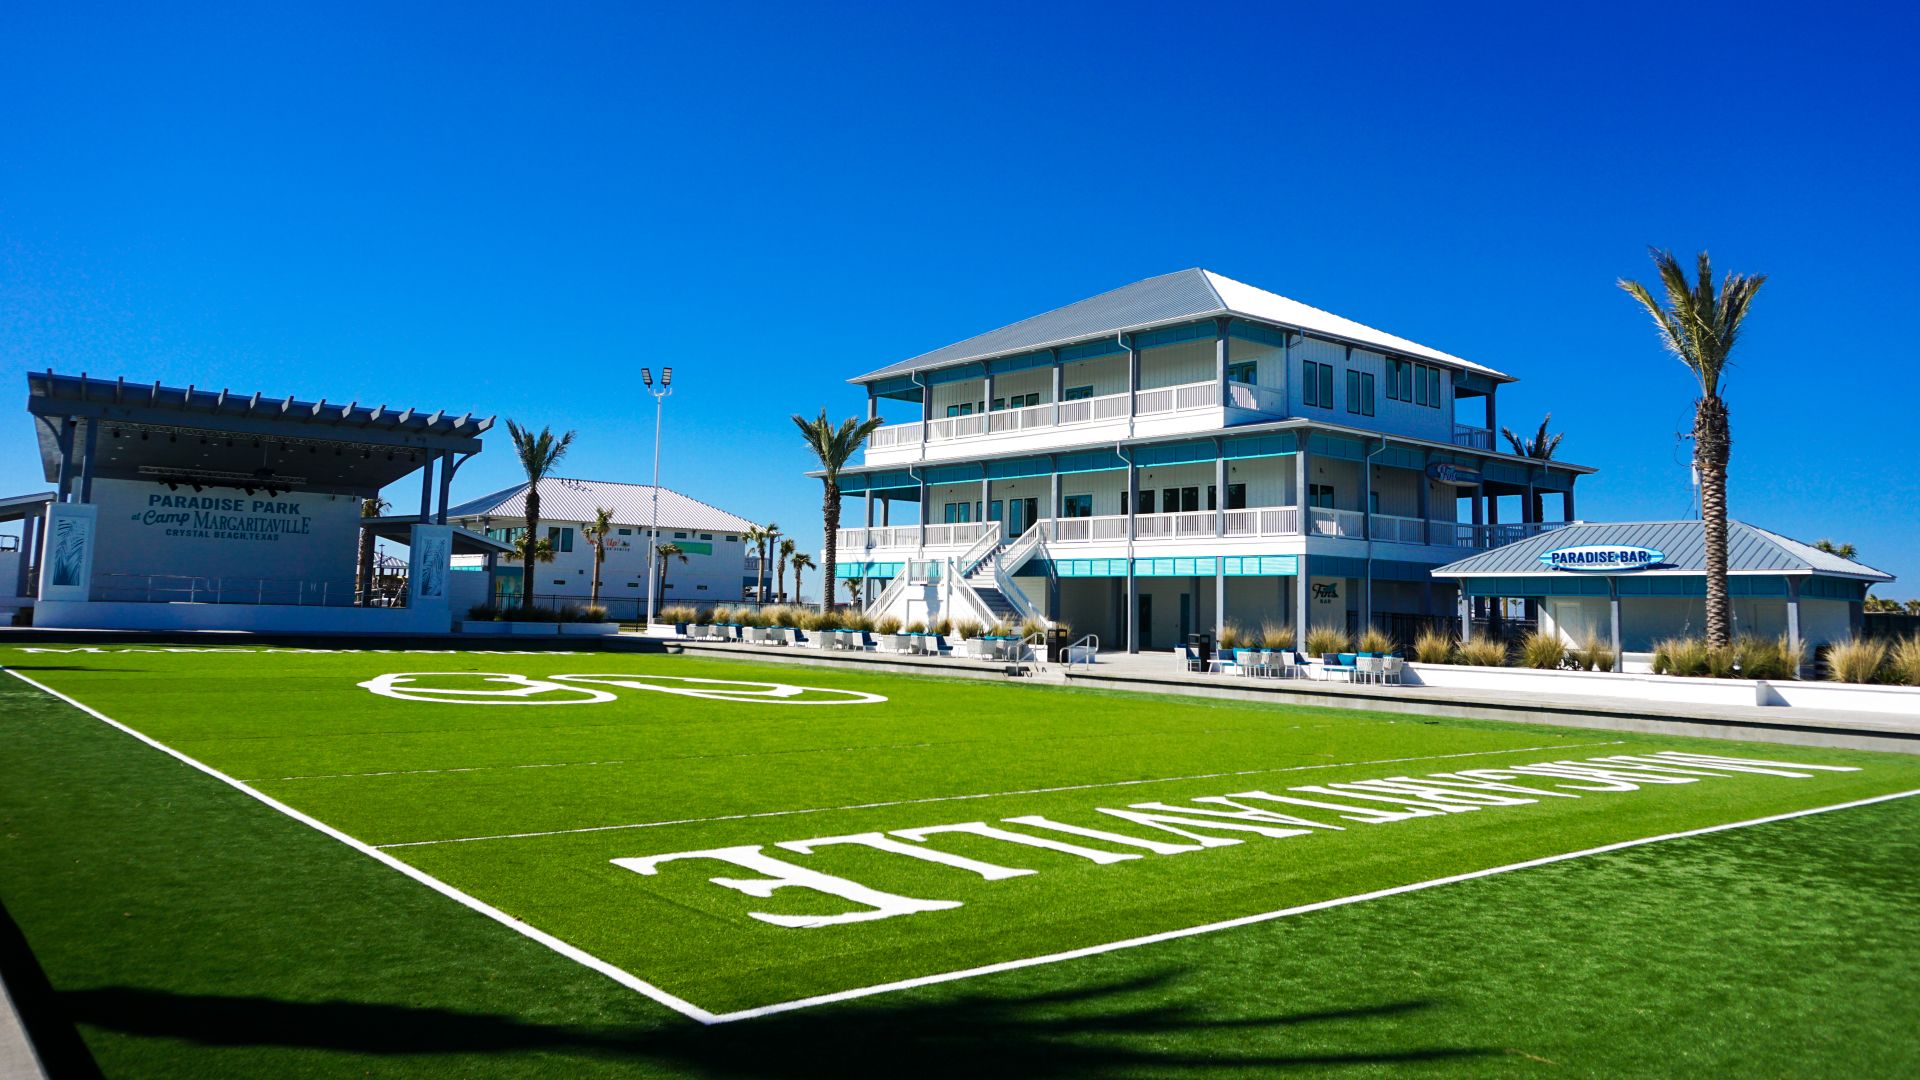 A Football Field With A Building In The Background